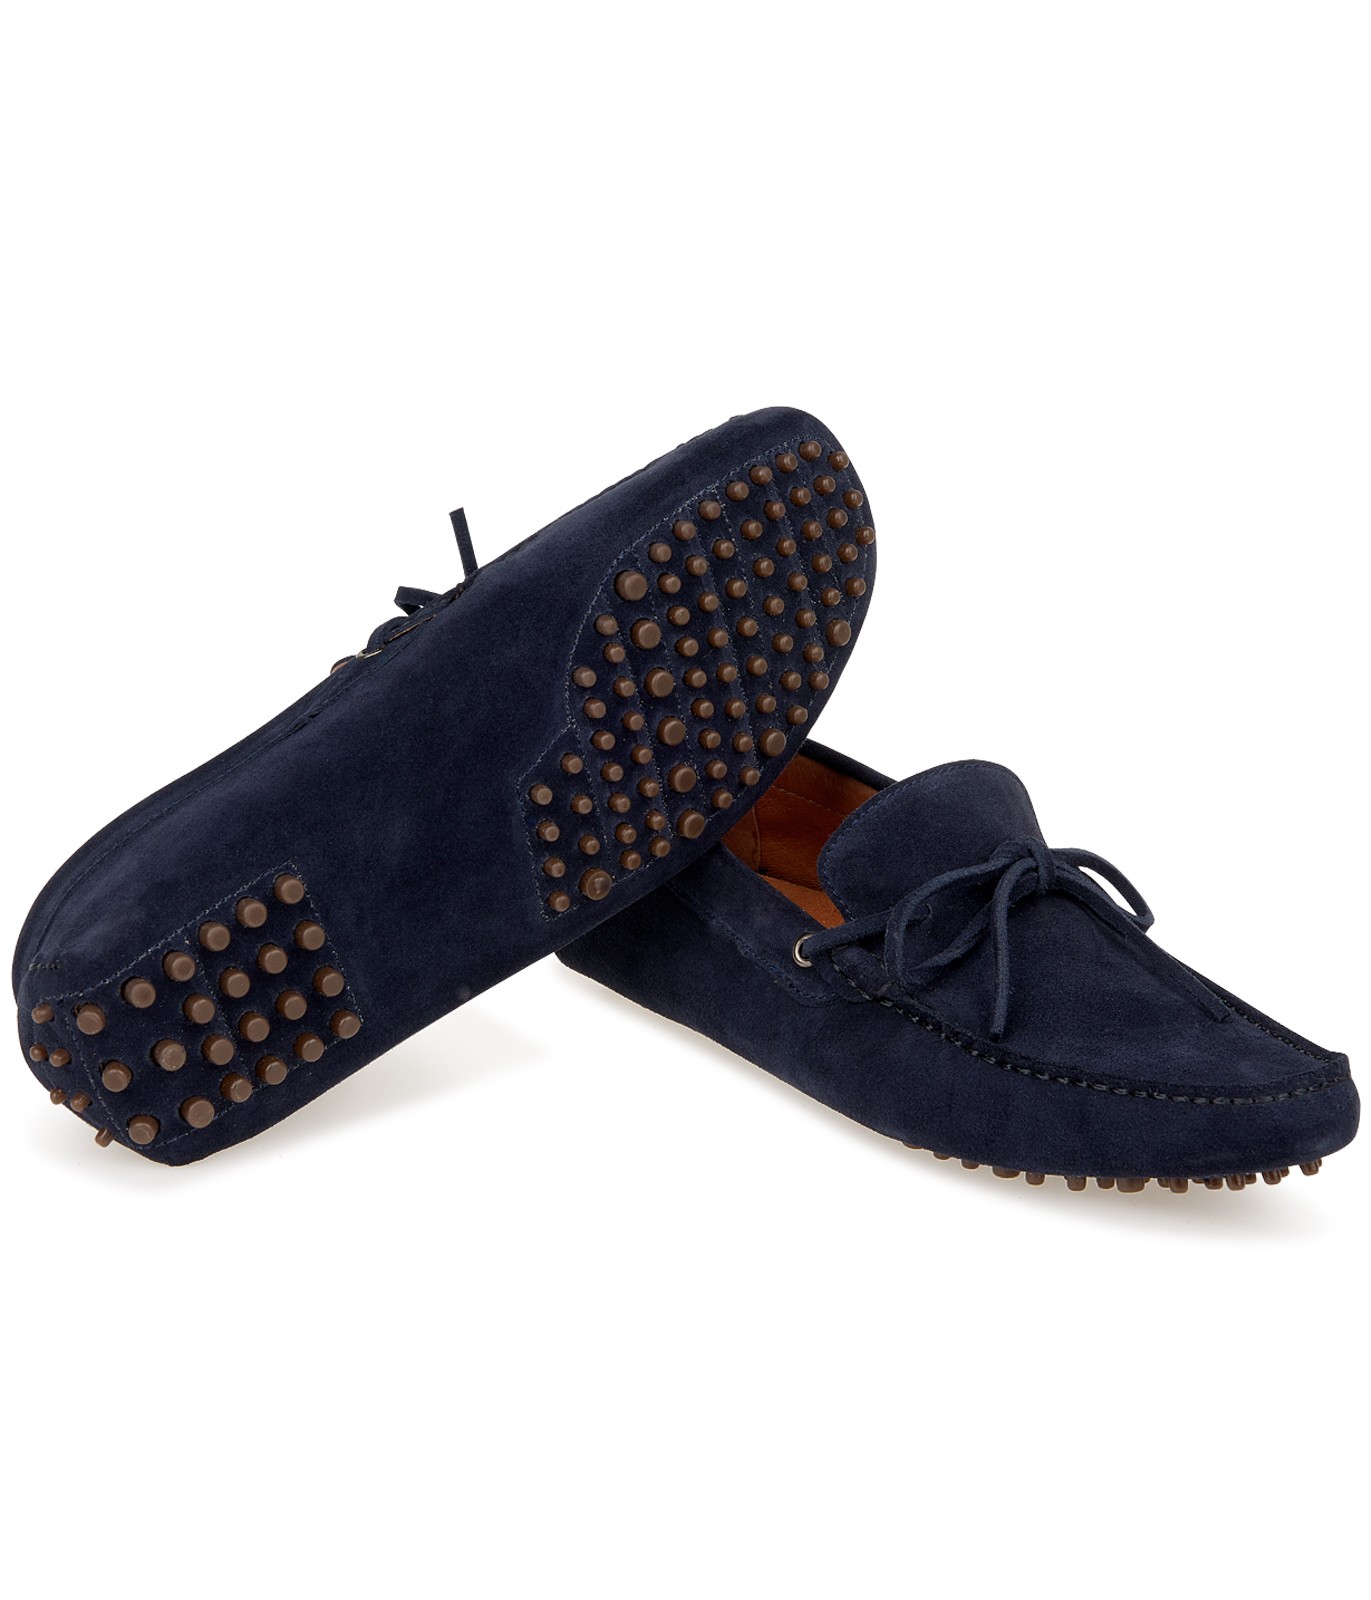 Blue Navy Suede Driving Shoes